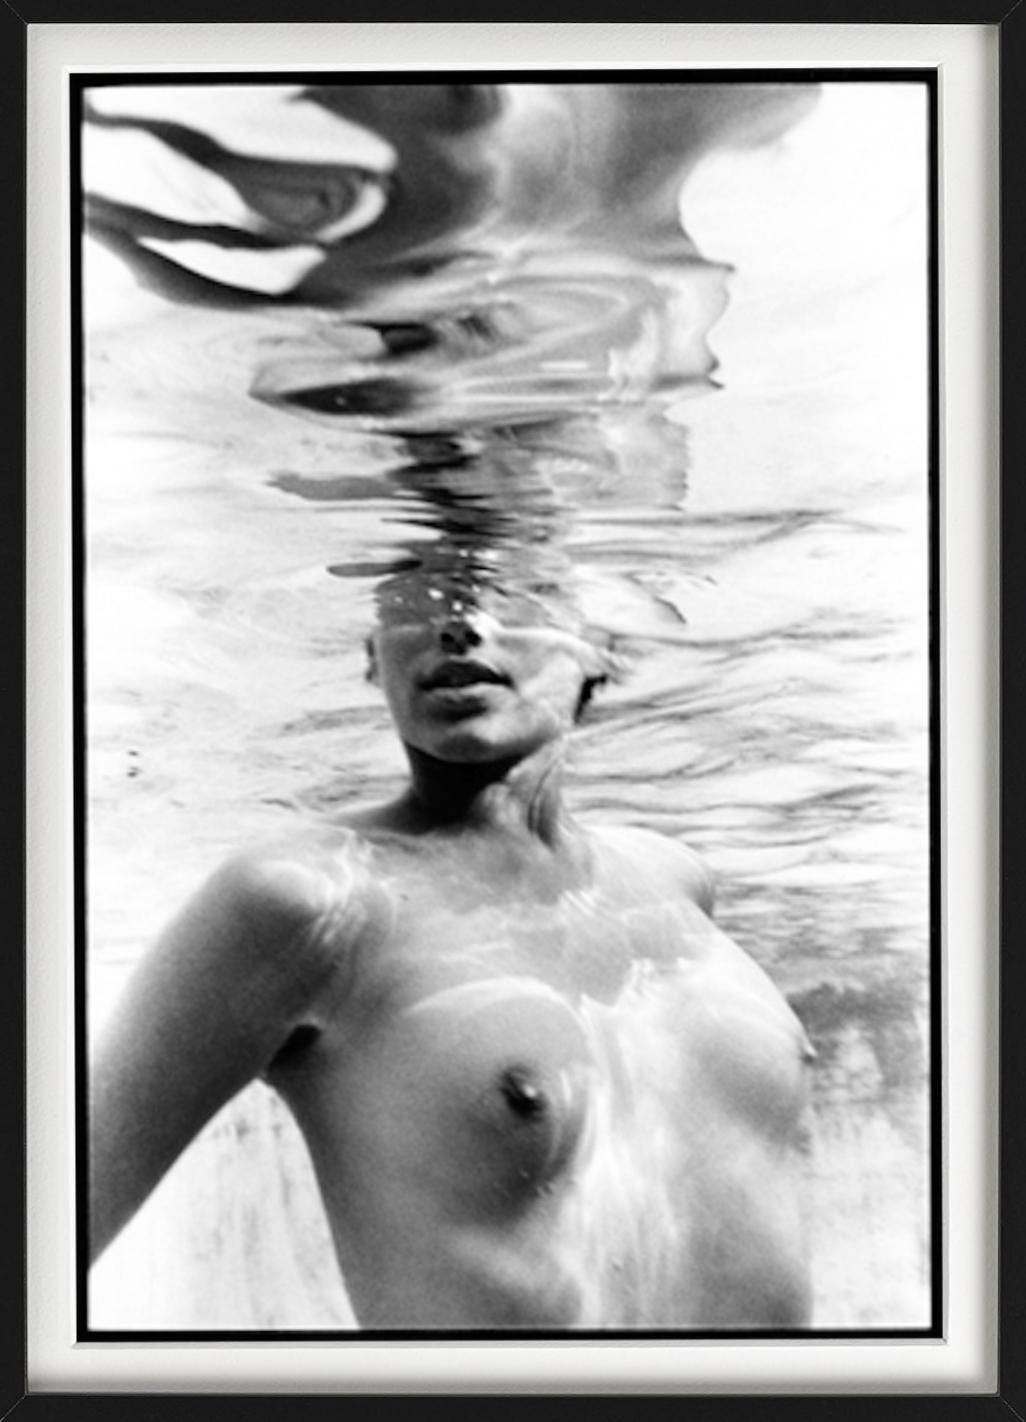 Emma Underwater - Nude Model Underwater black-and-white photography - Contemporary Photograph by Arthur Elgort